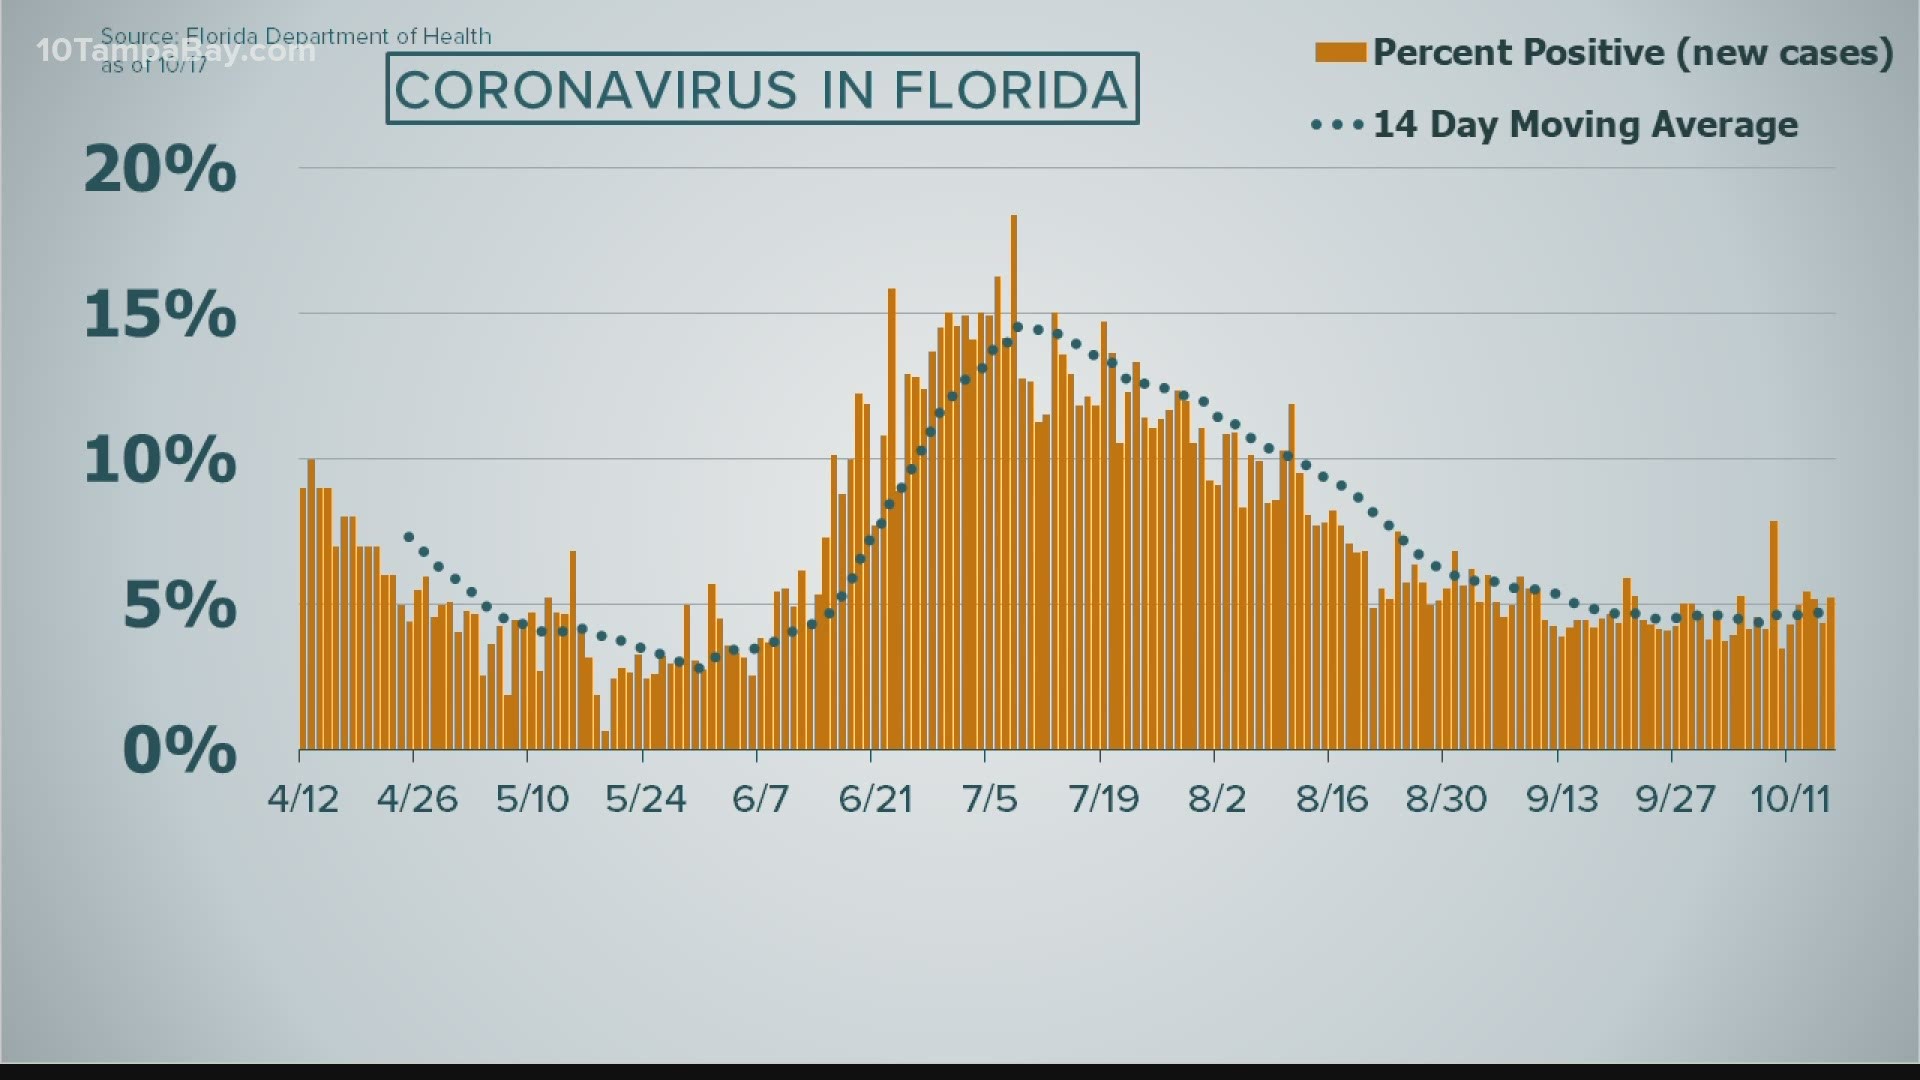 For the fifth day in a row, the number of new COVID-19 infections statewide has increased. Nationally, numbers are trending higher.